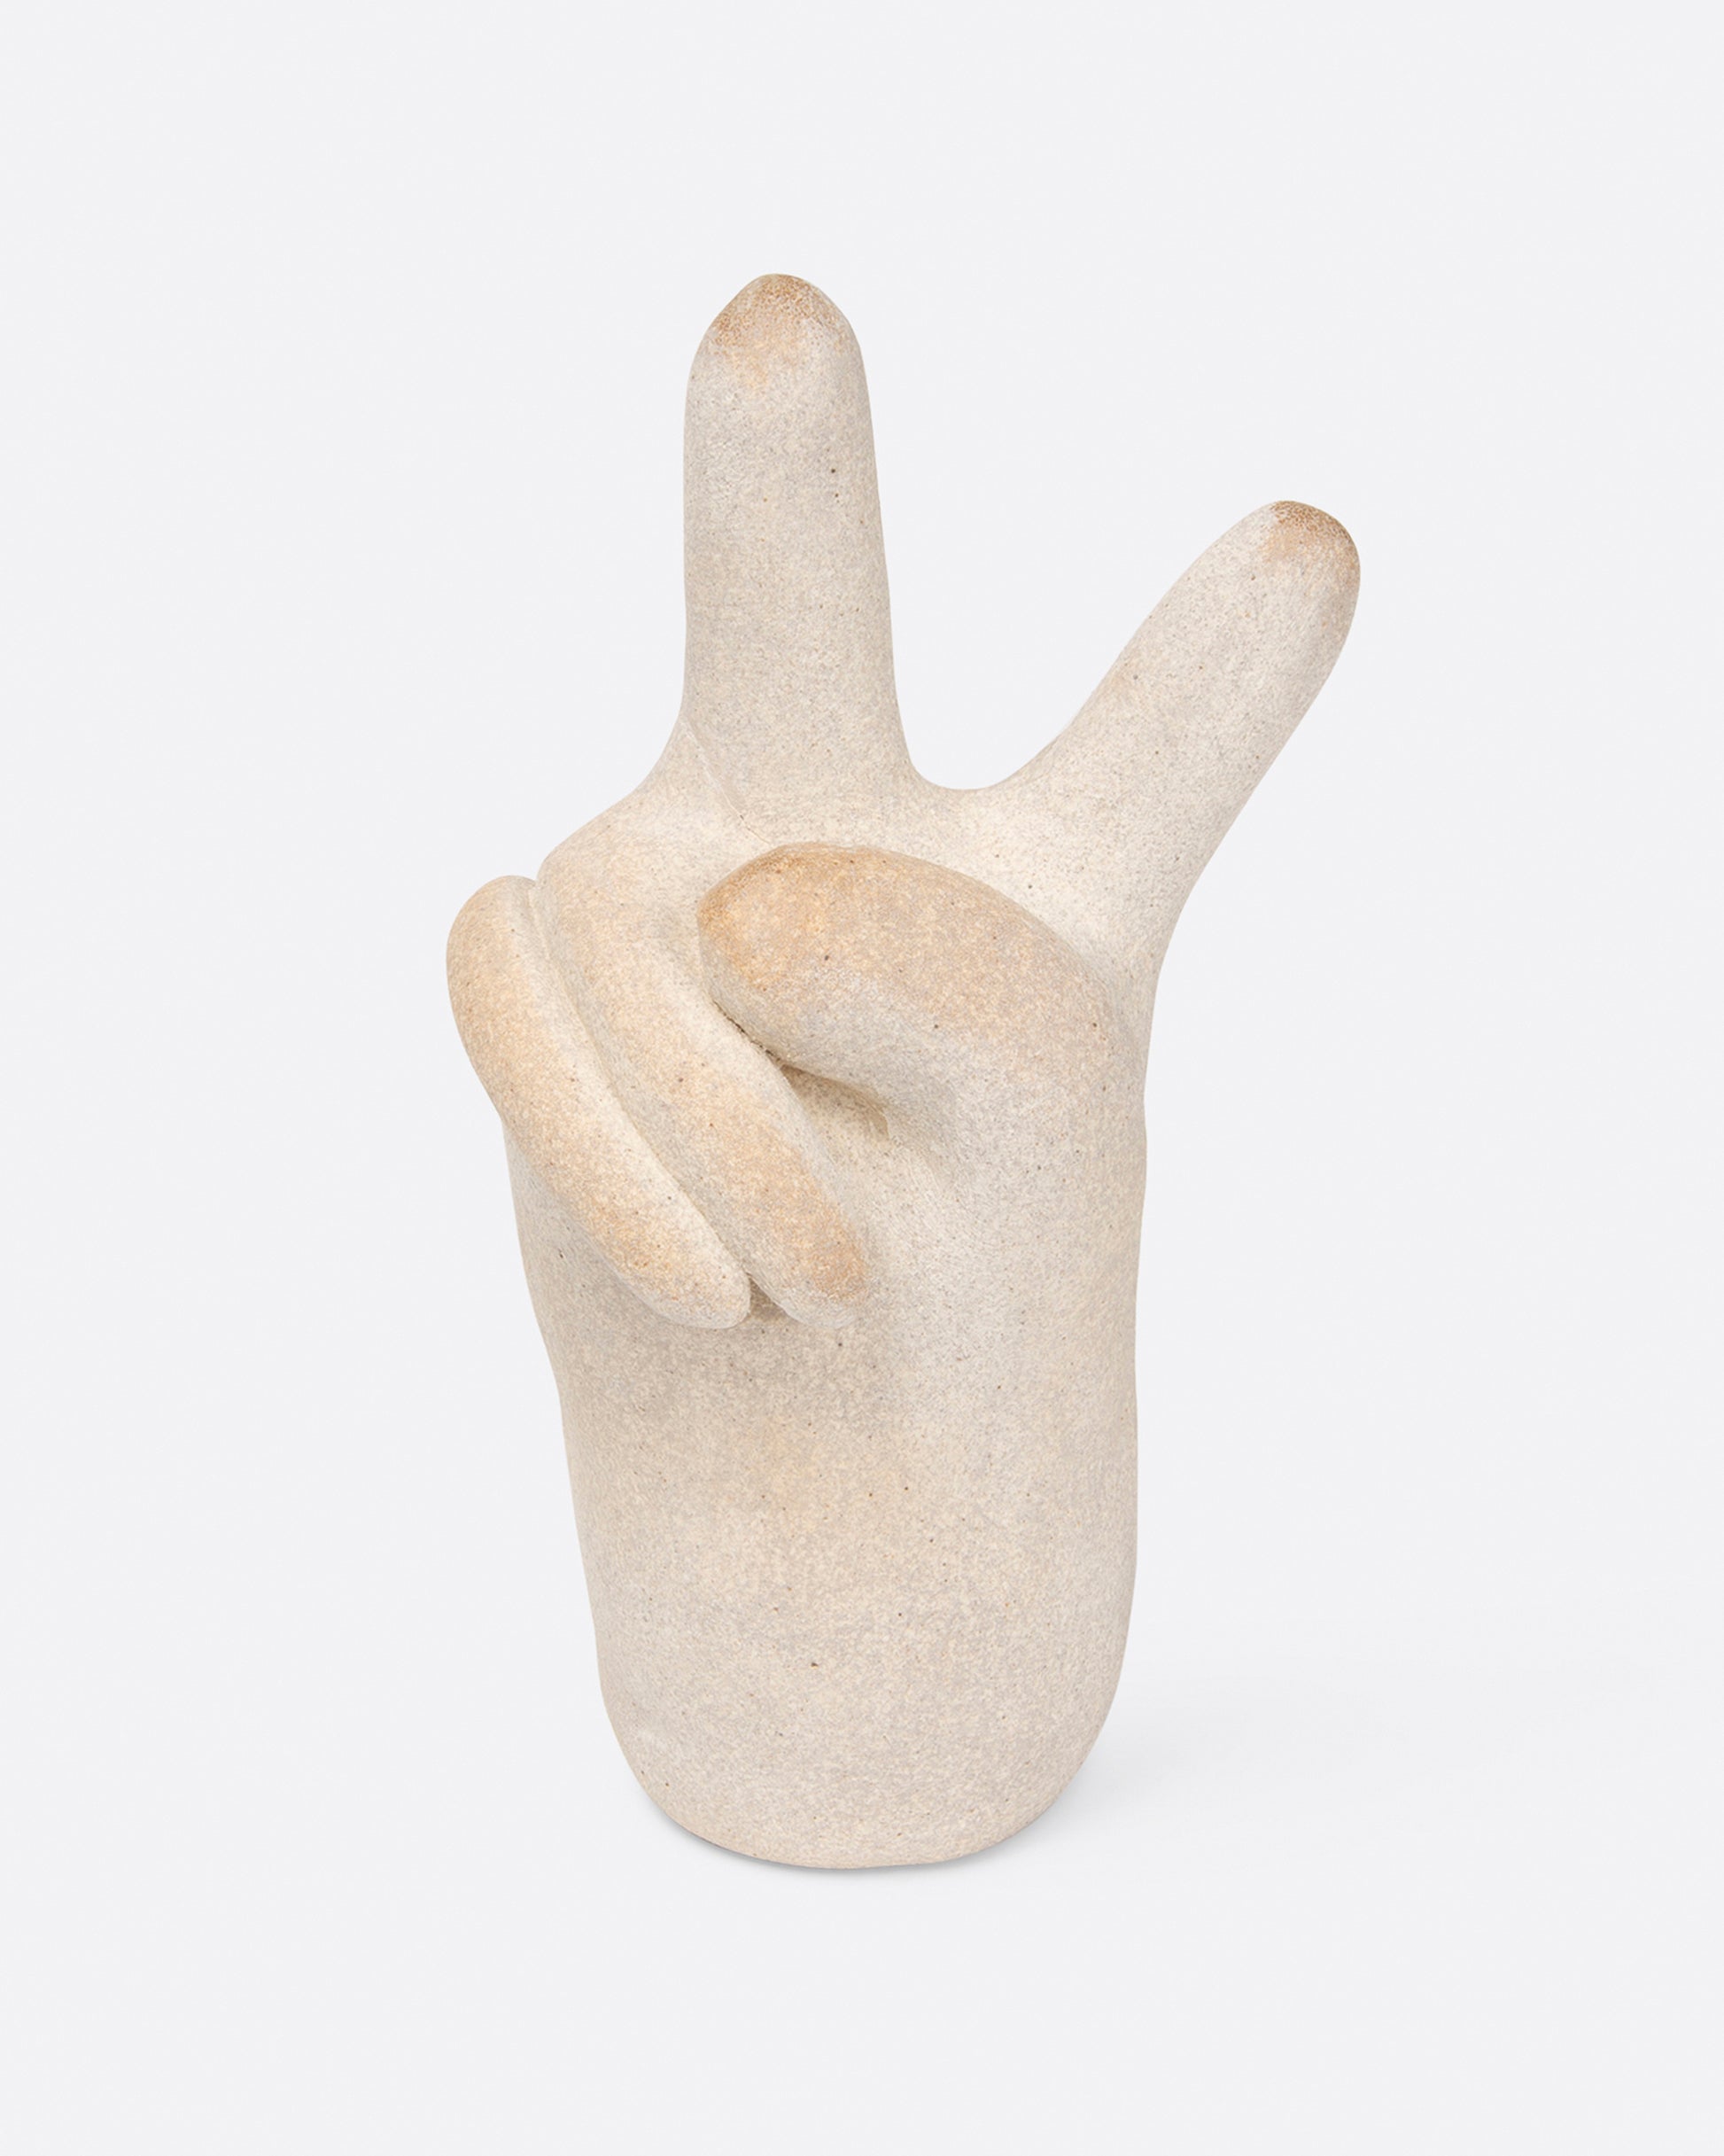 A small, off-white peace hand sculpture, shown from the front.